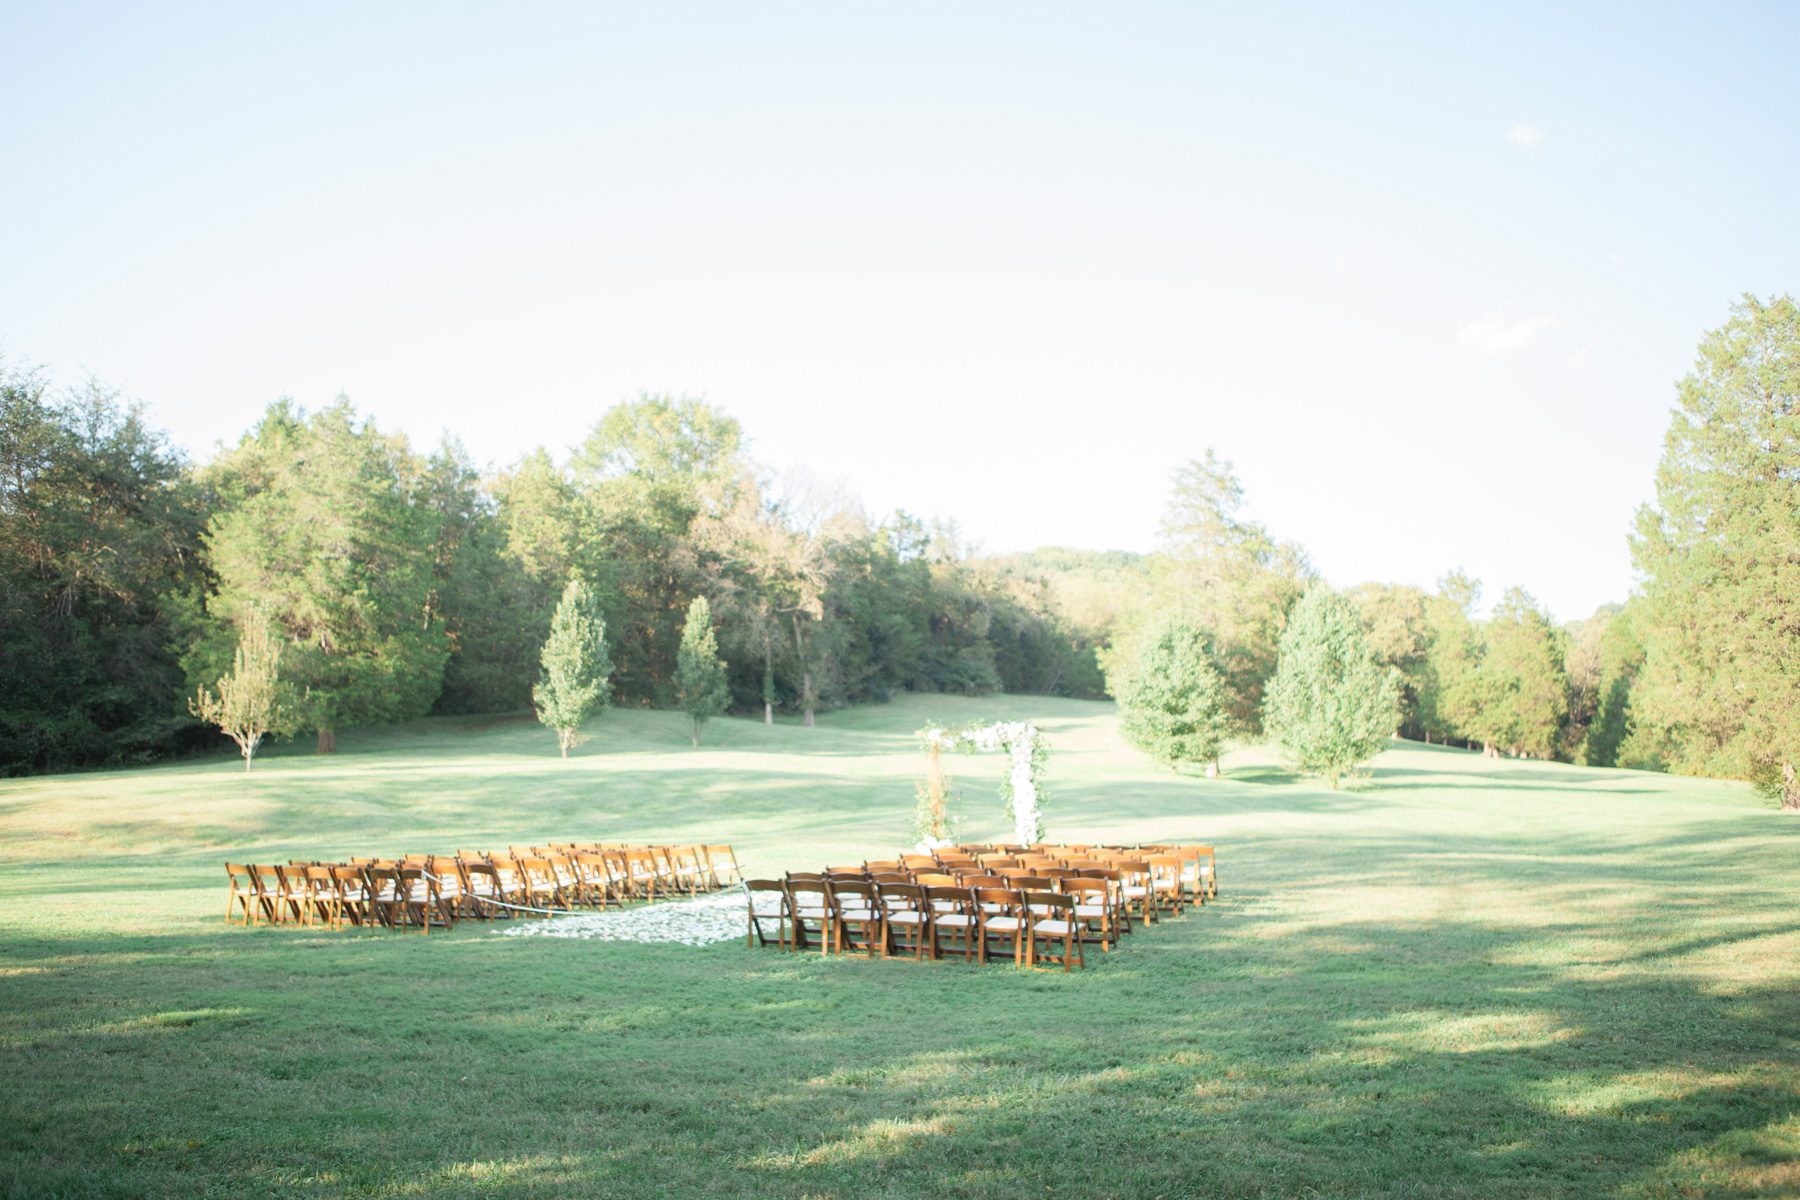 The meadow before the wedding. Wedding photography at Cedarwood Weddings and Estate in Nashville, TN photography by Krista Lee Photography